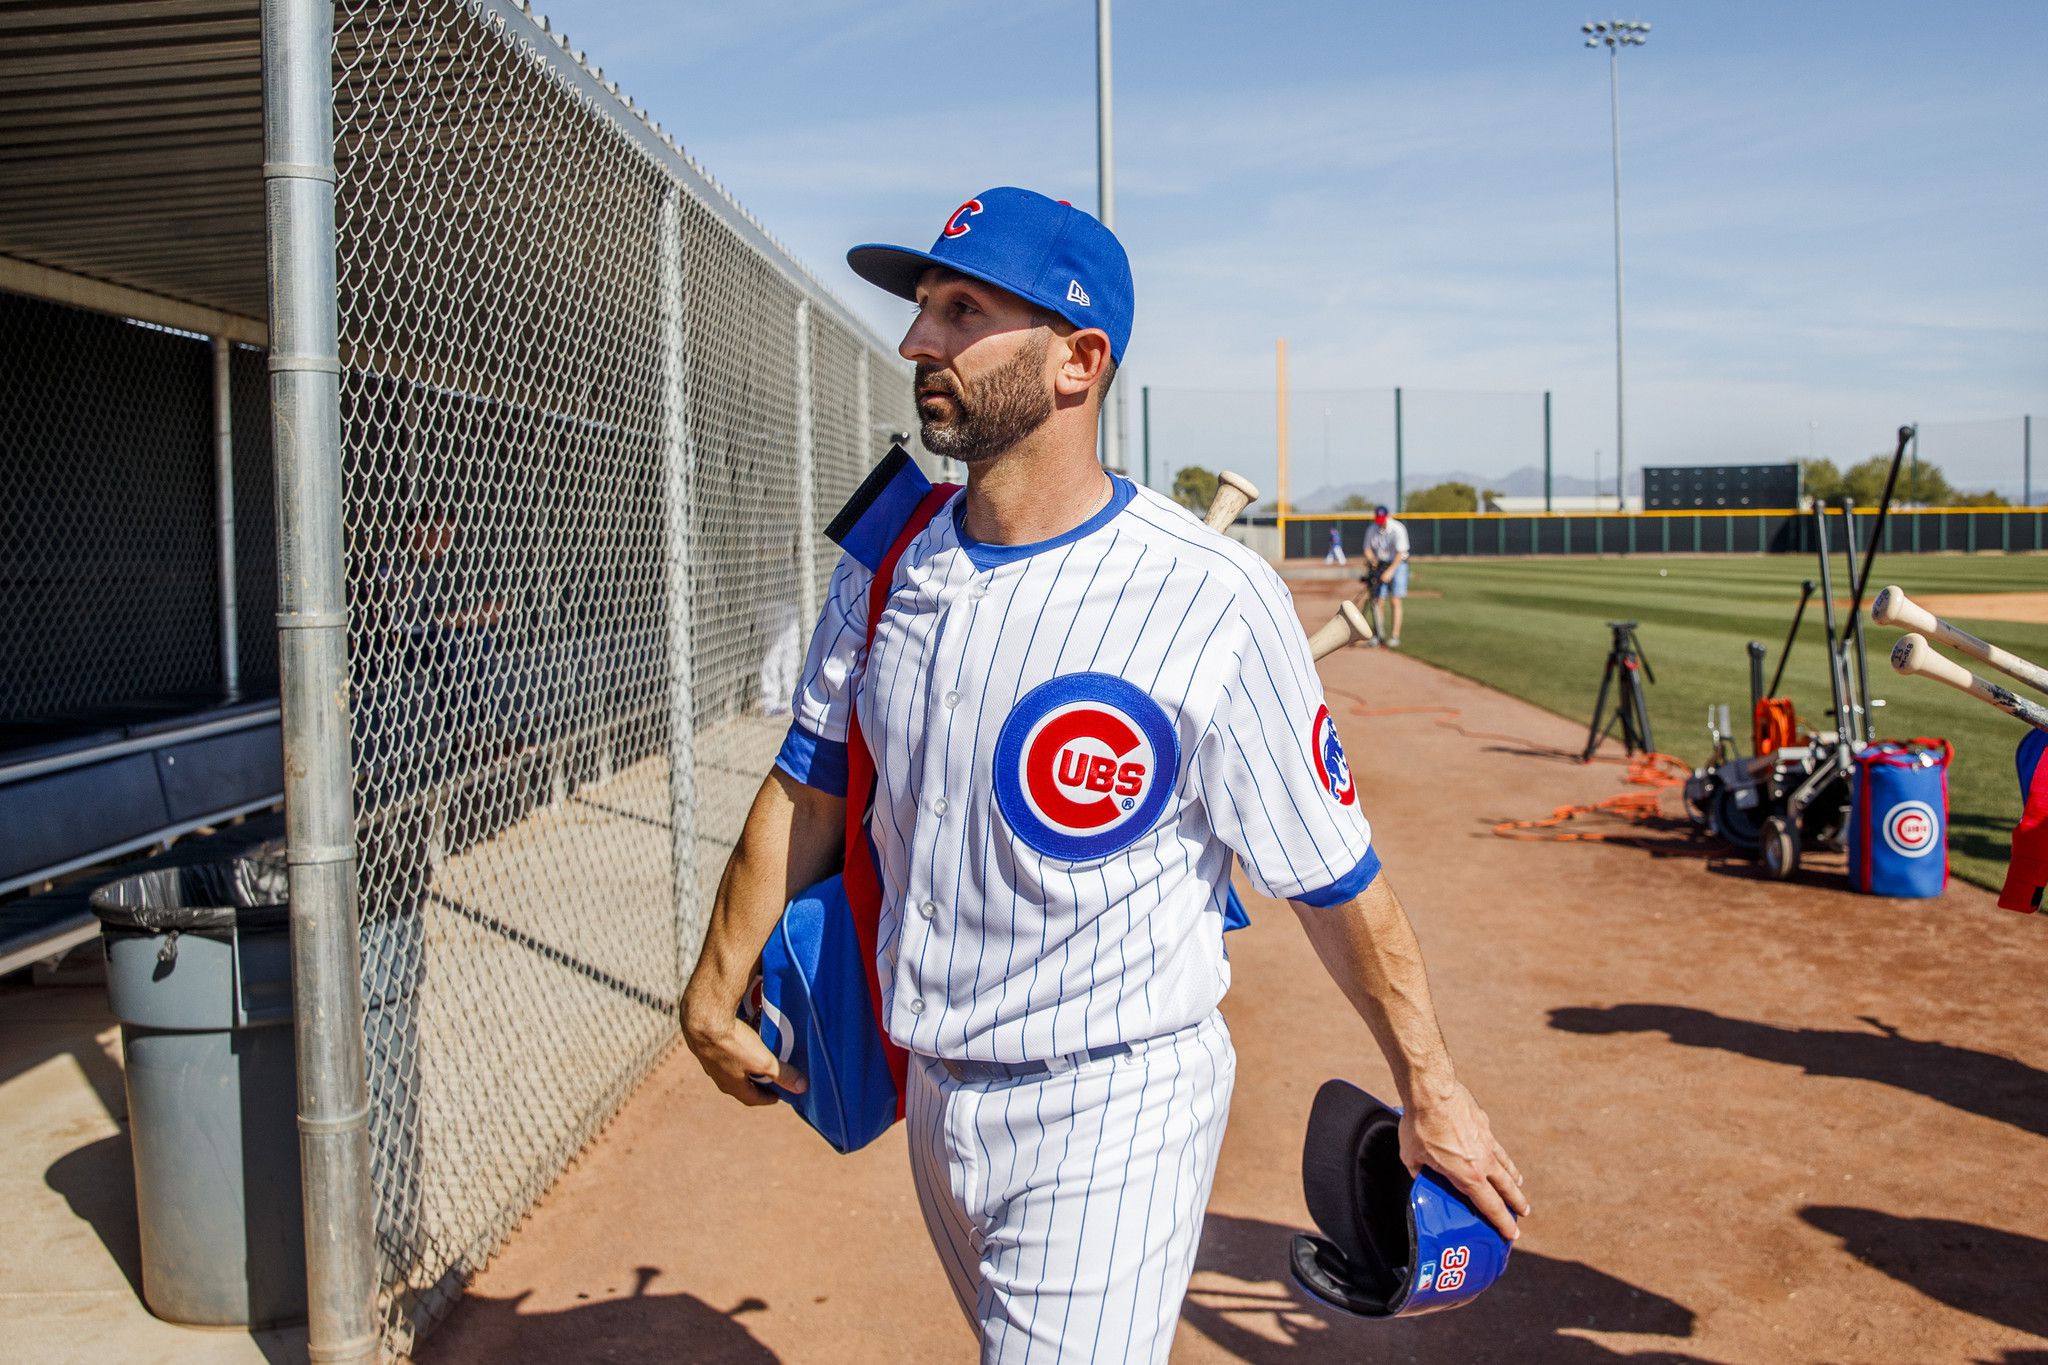 Batting practice and sunglasses at Cubs spring training